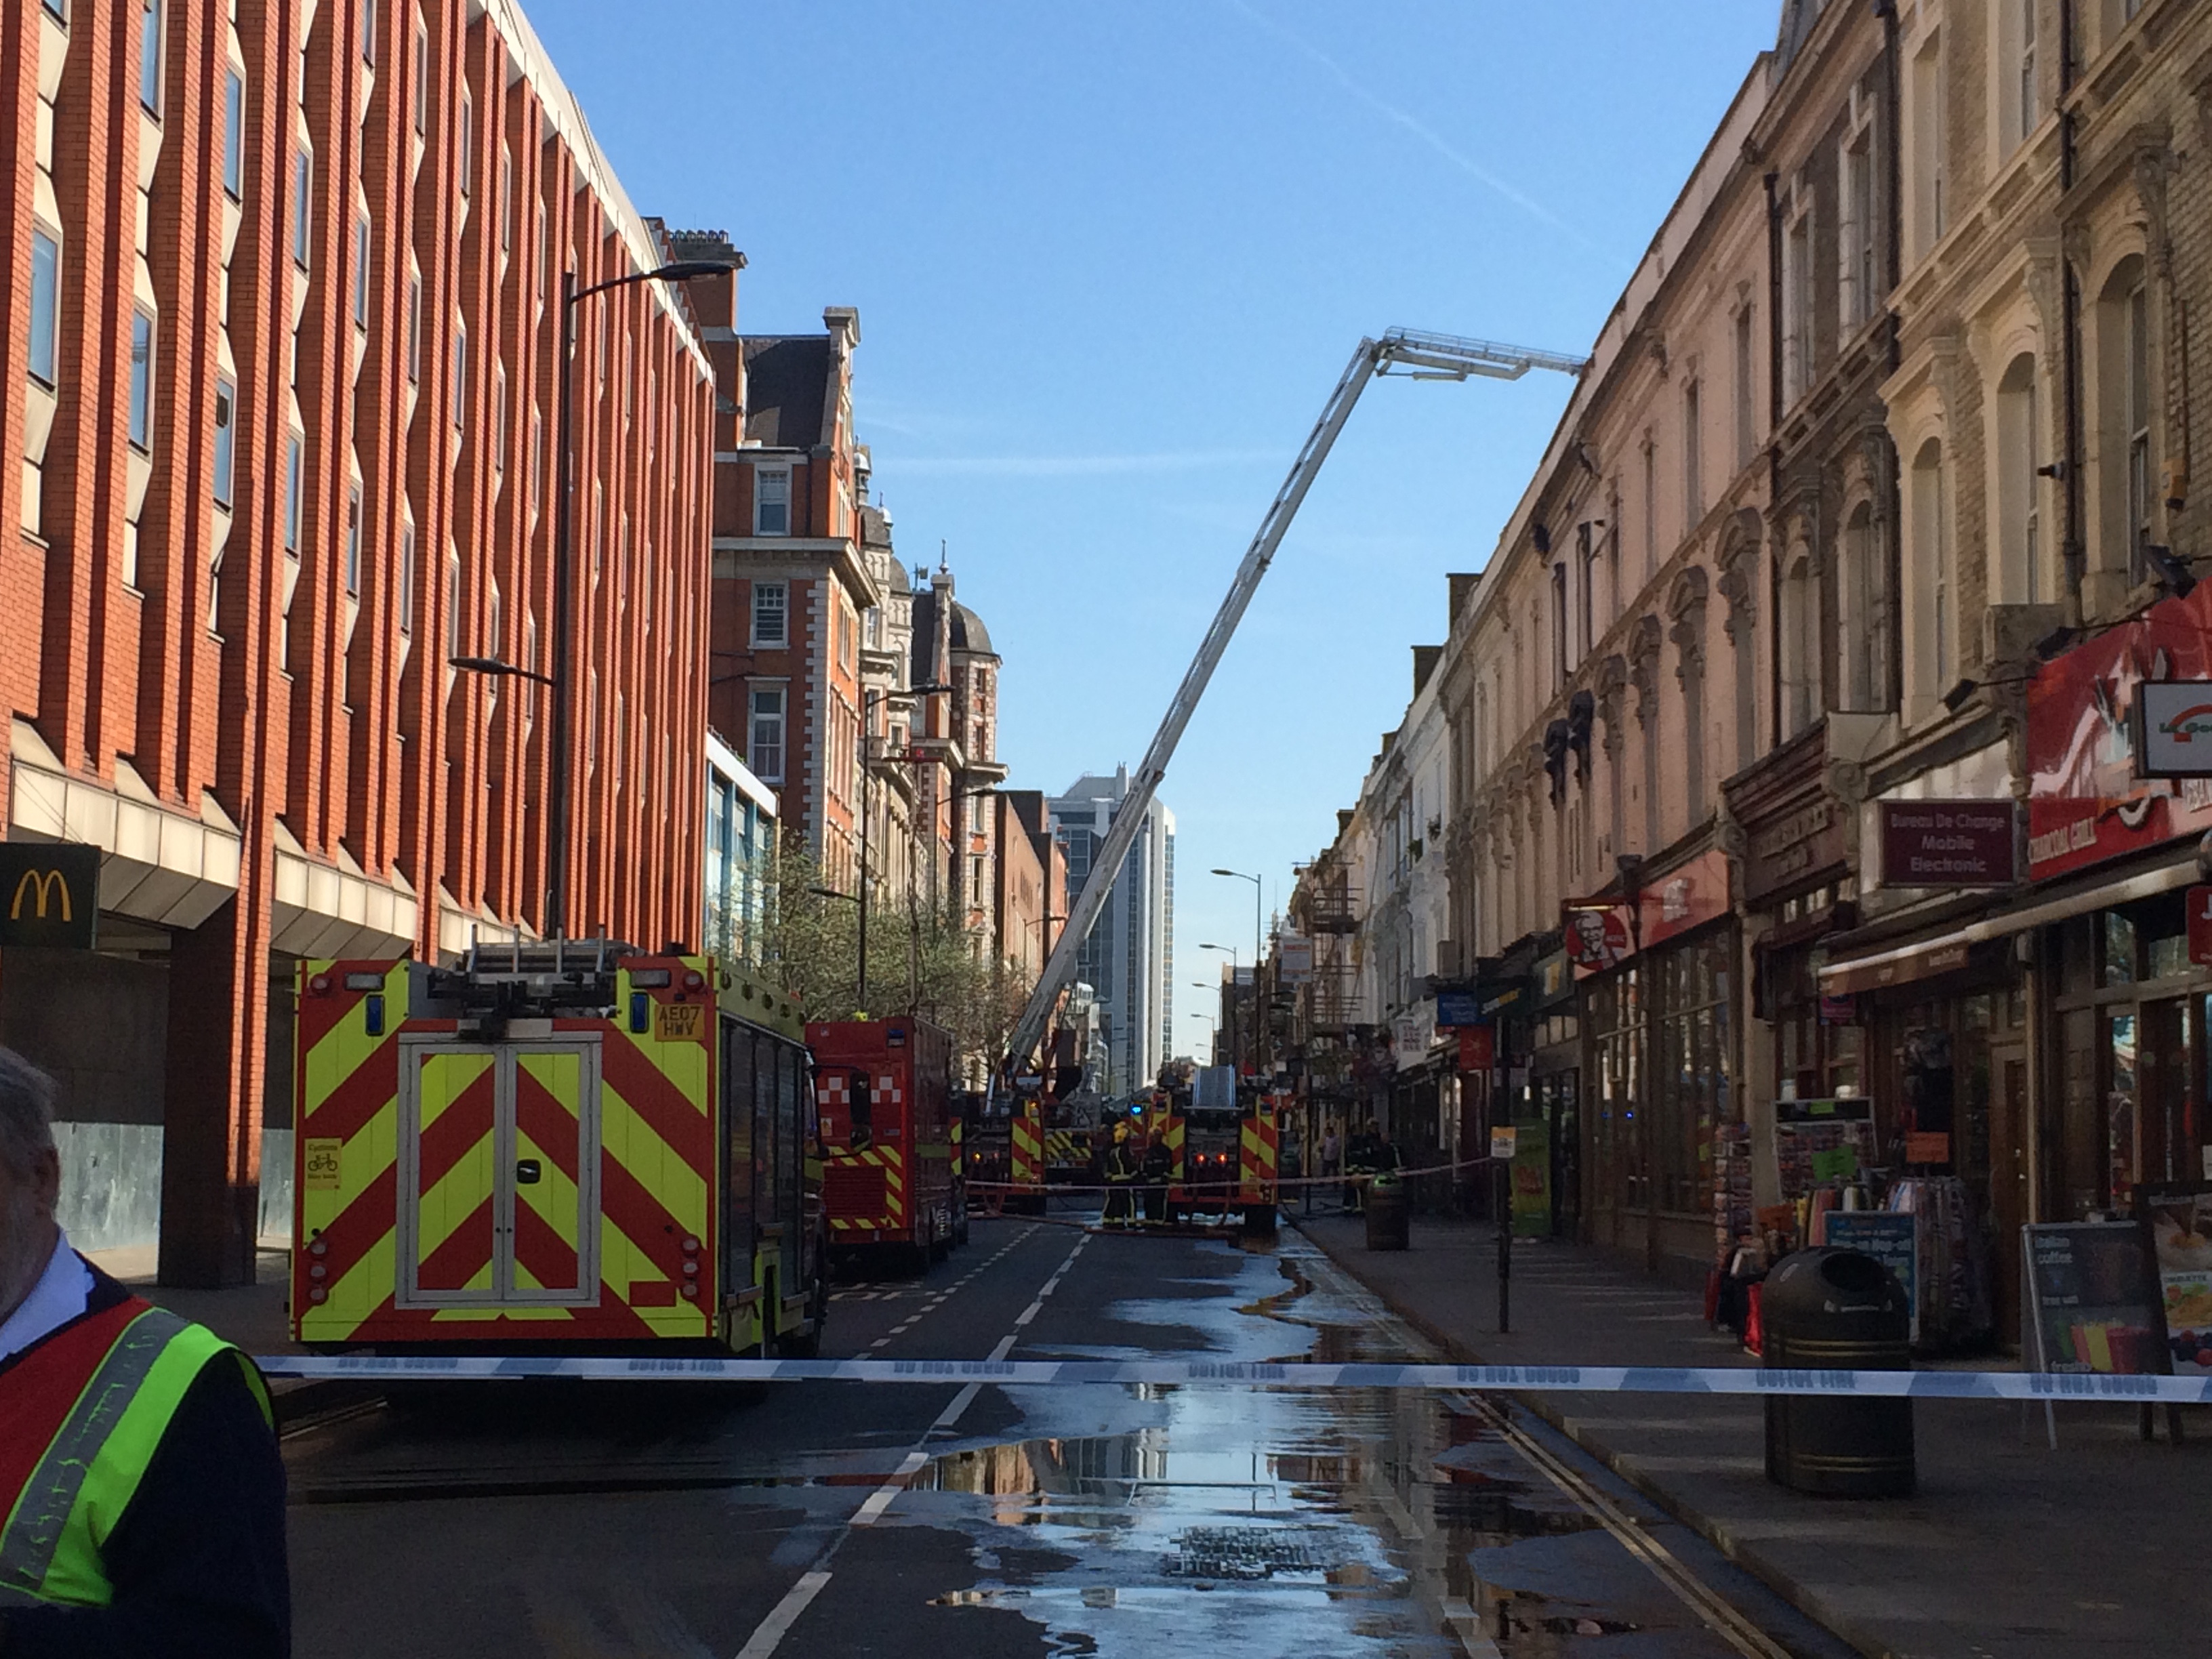 Pared Street was closed after a fire in a chicken shop. Photo Laurence